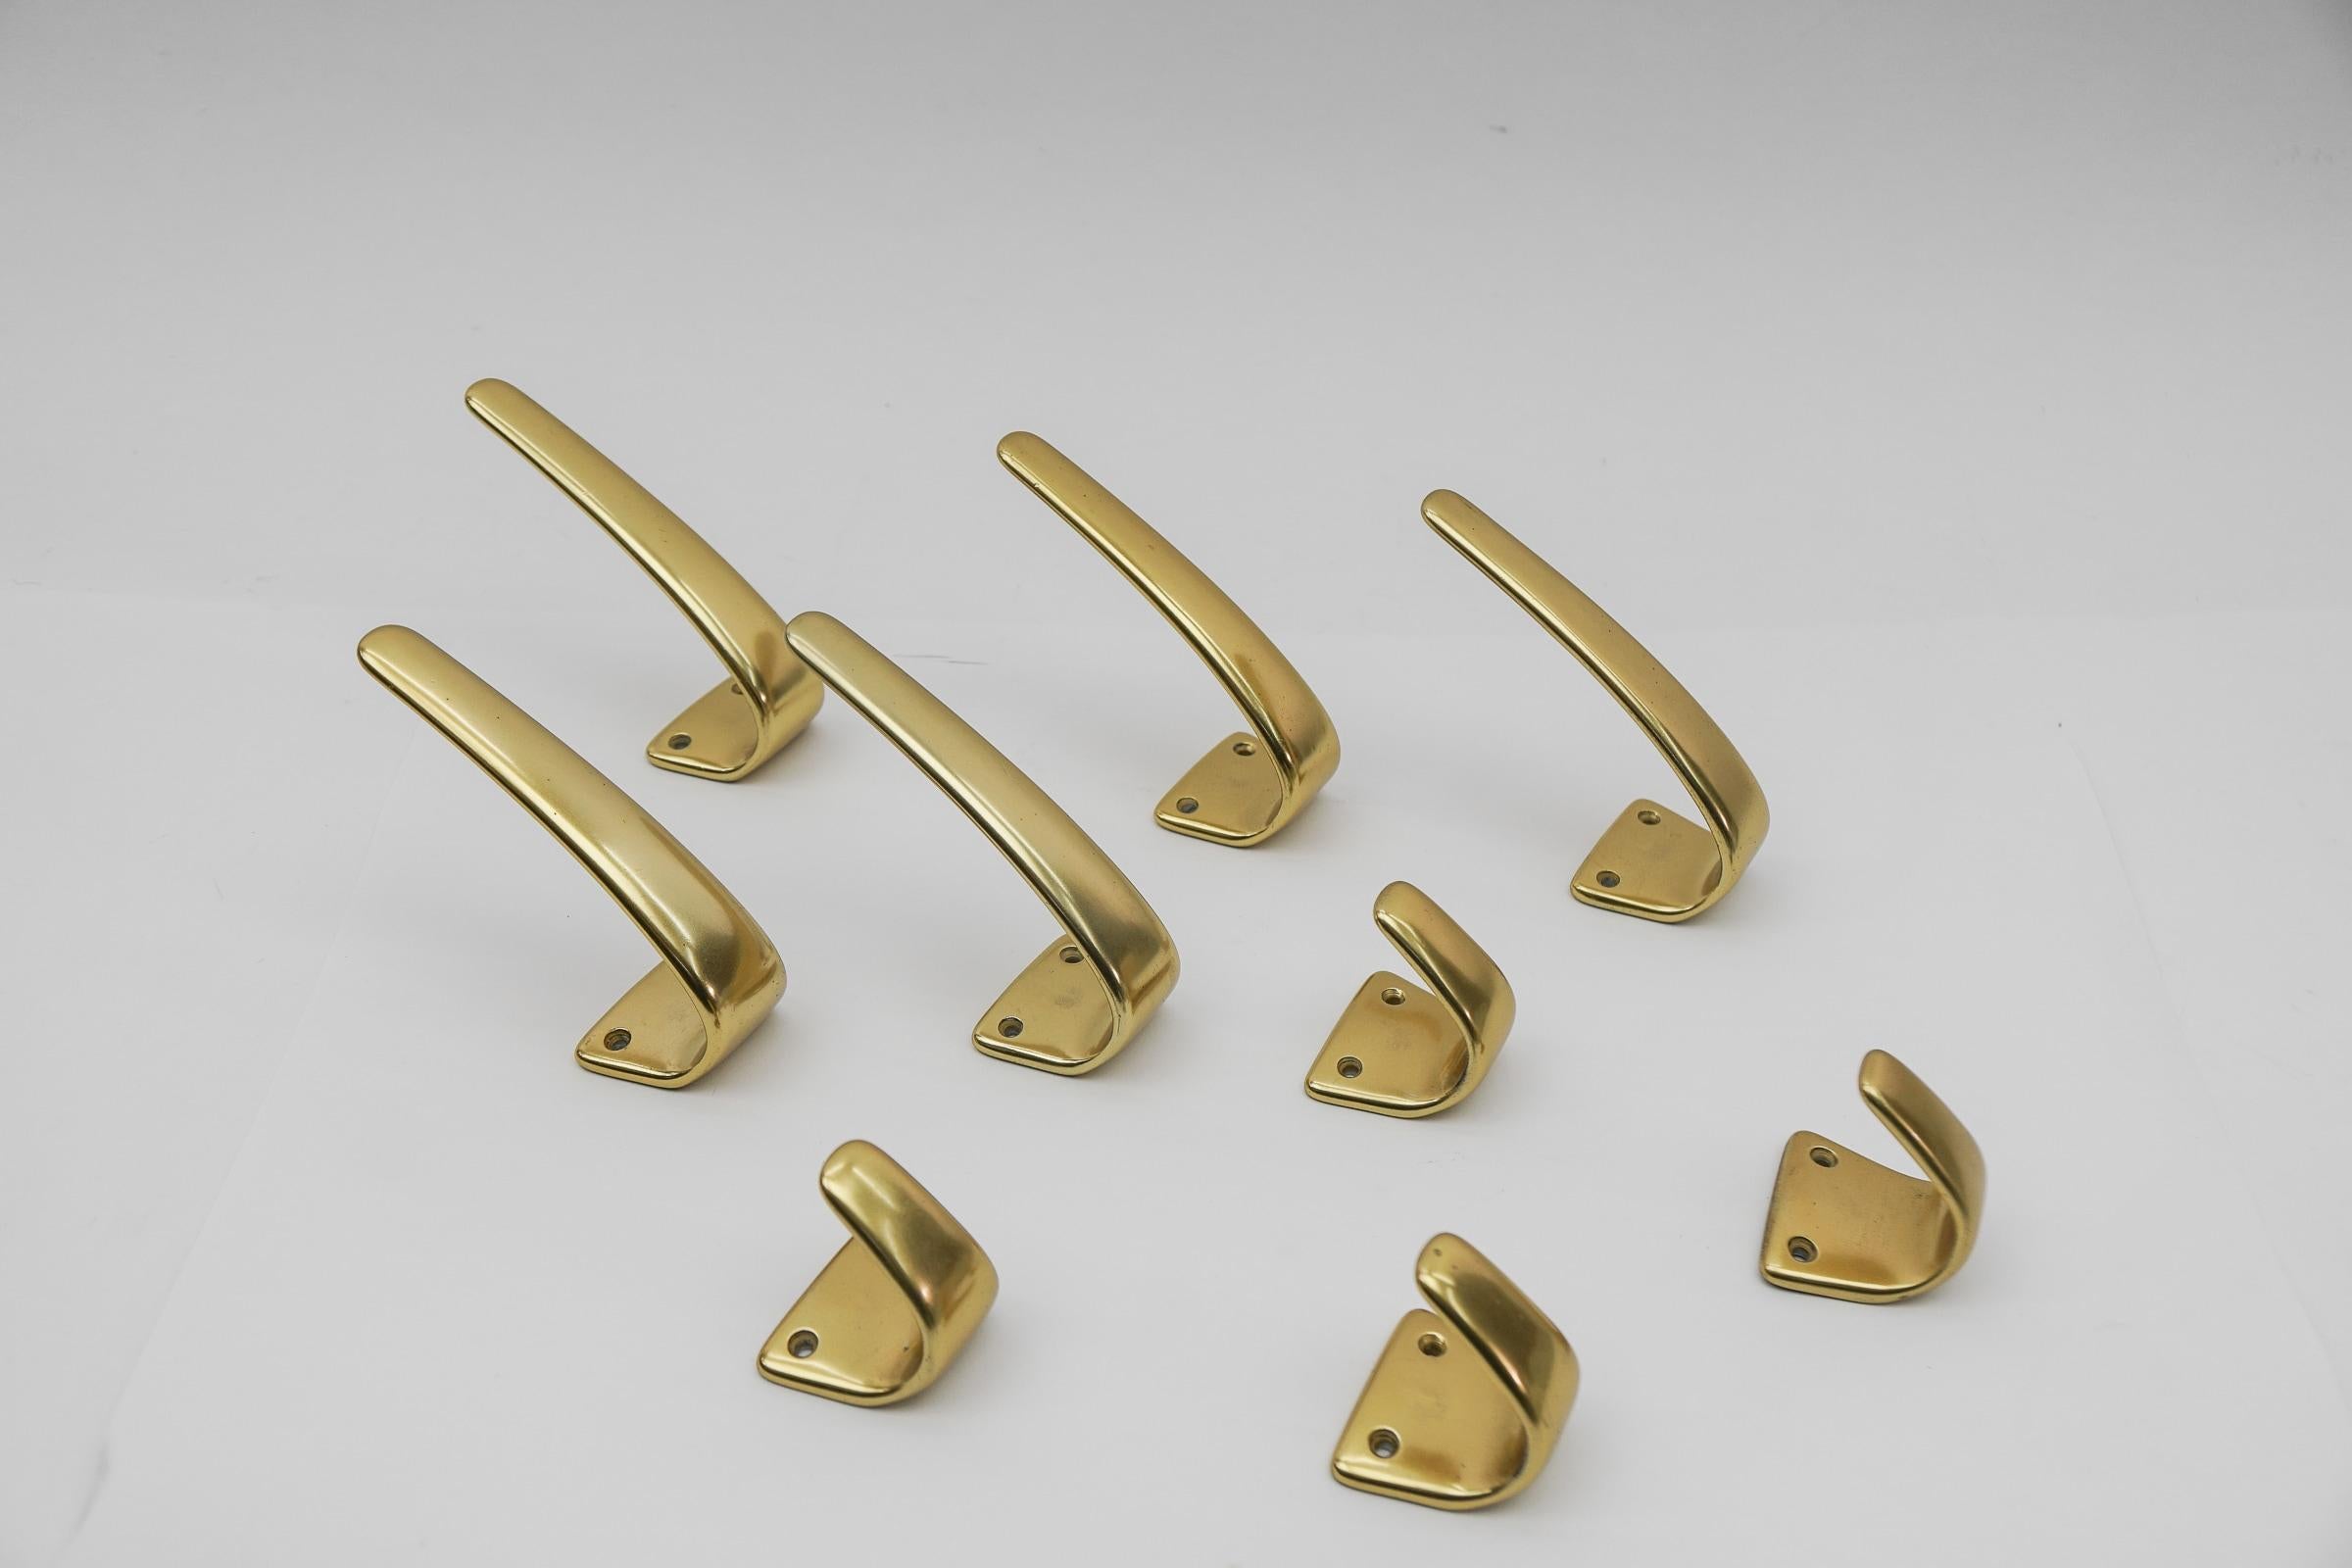 Set of 18 Midcentury Brass Wall Hooks, Austria, 1950s For Sale 2